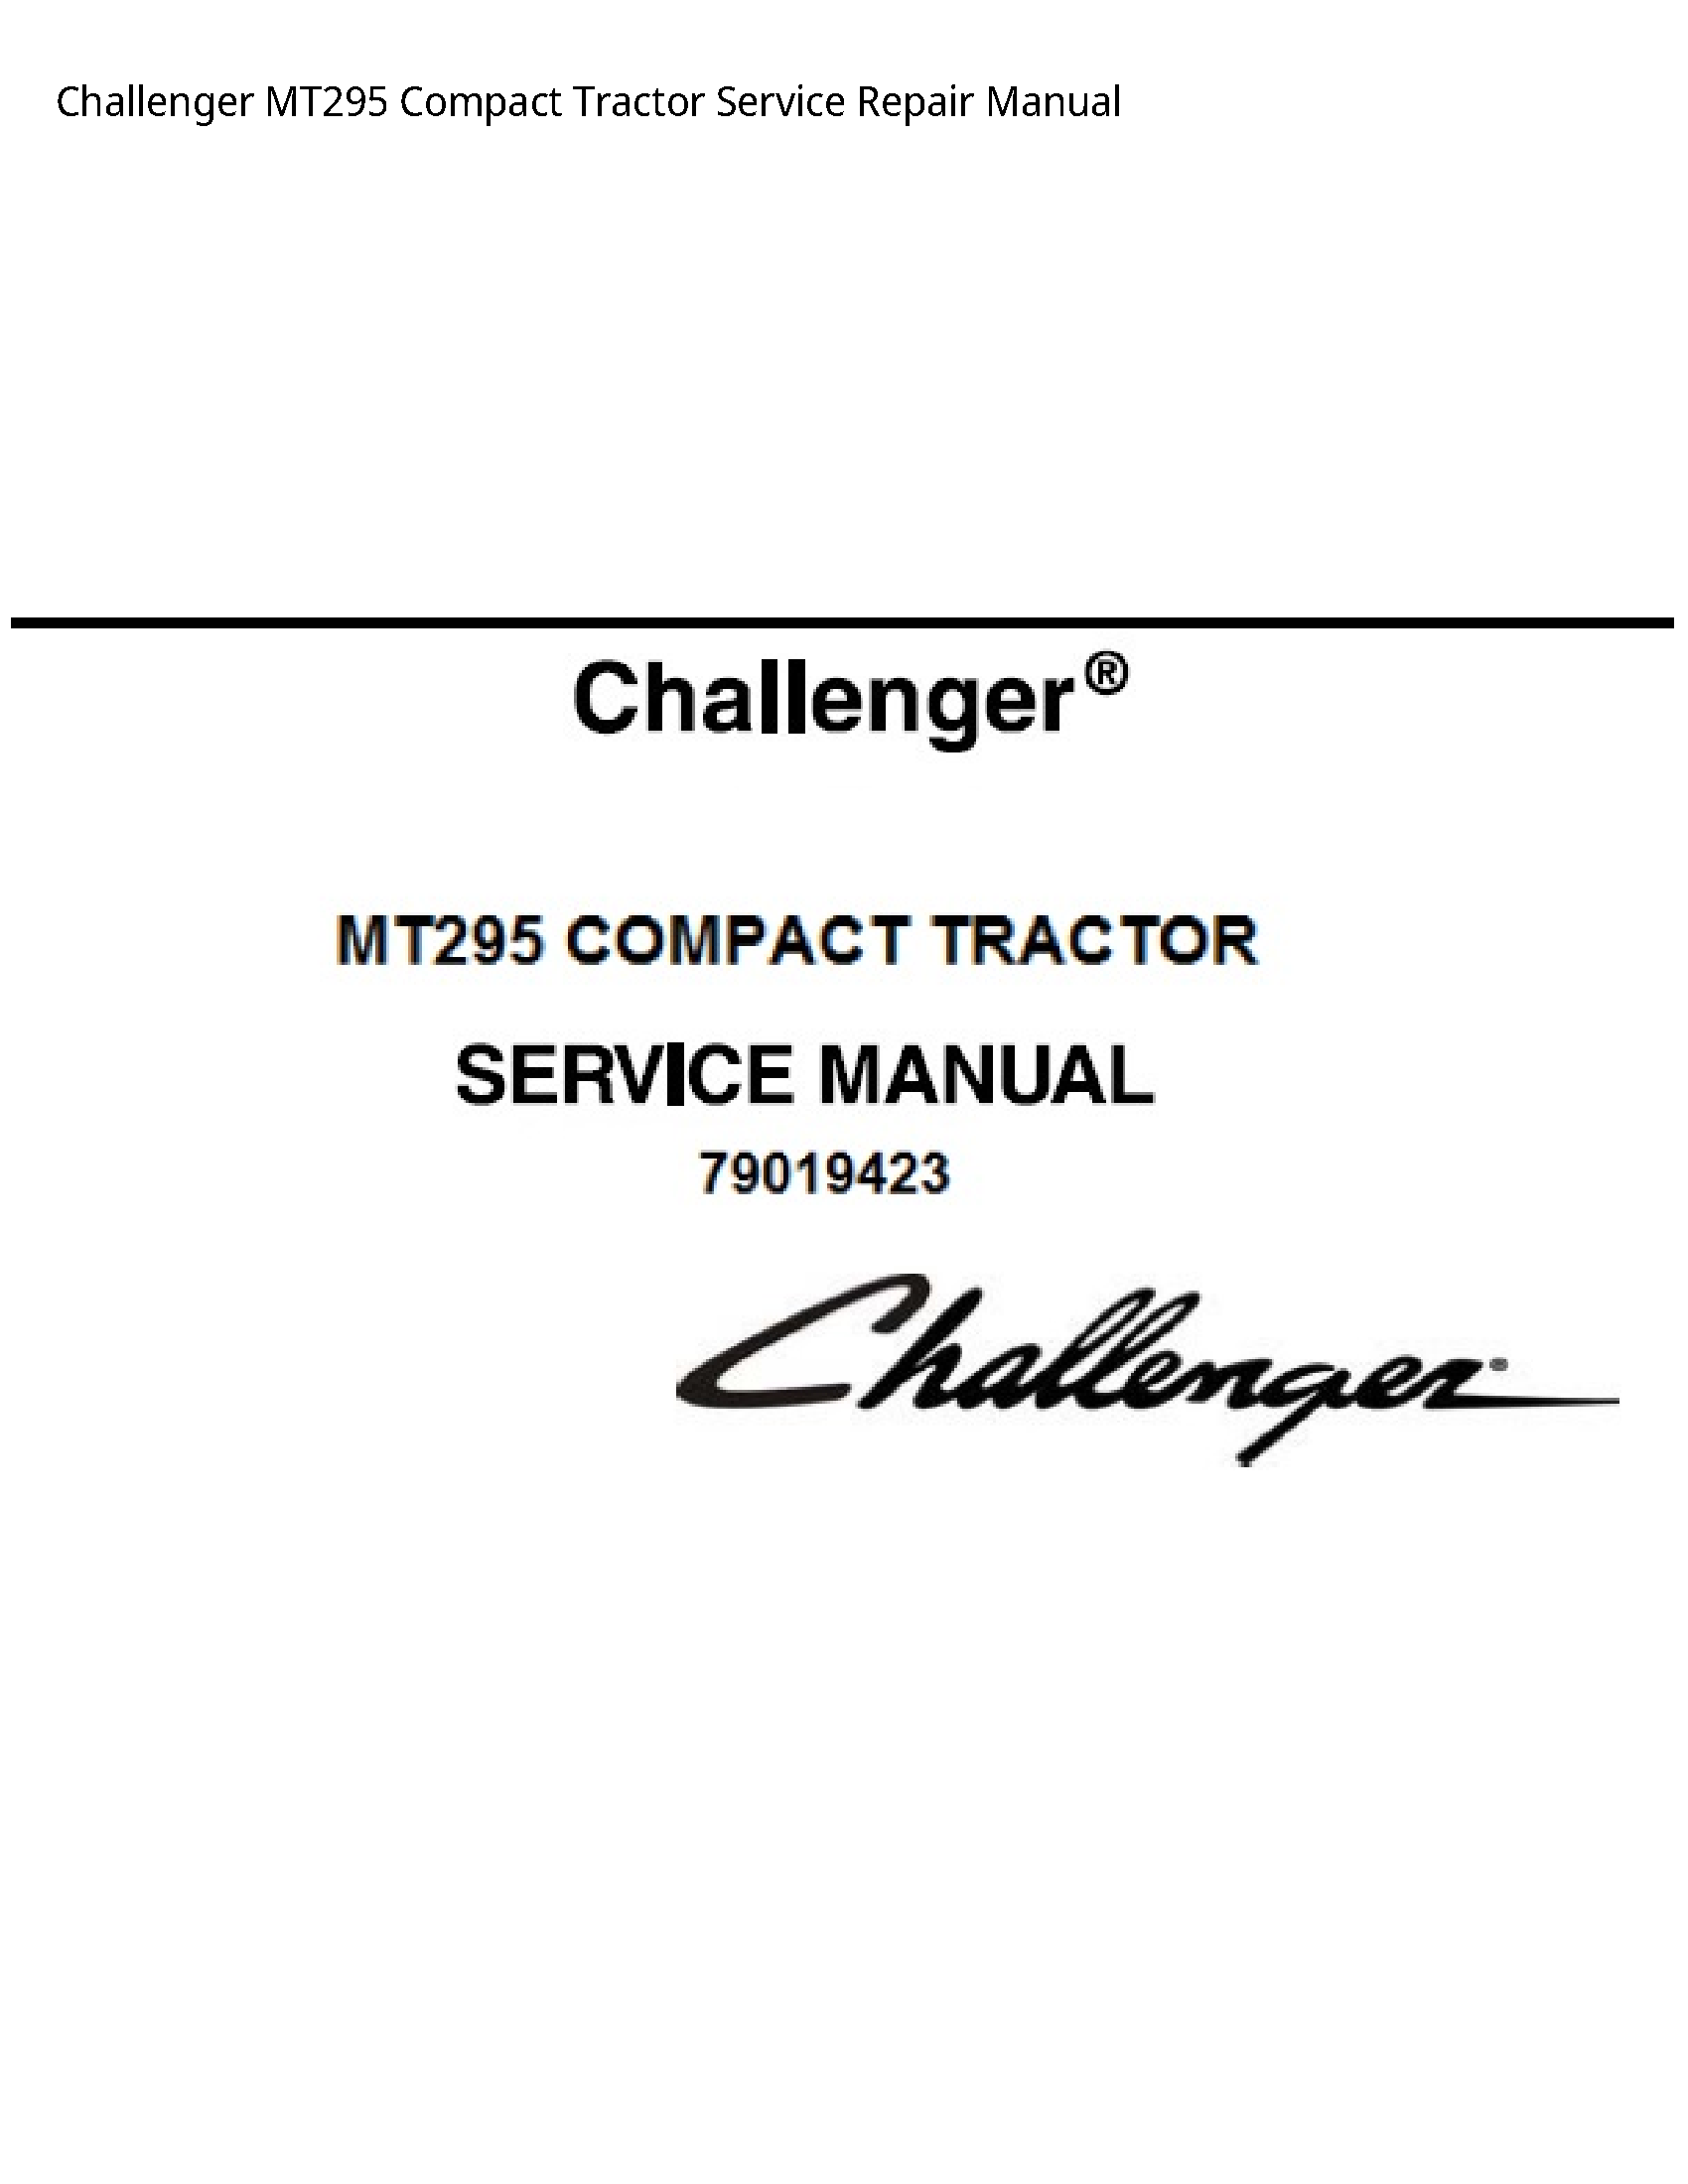 Challenger MT295 Compact Tractor manual